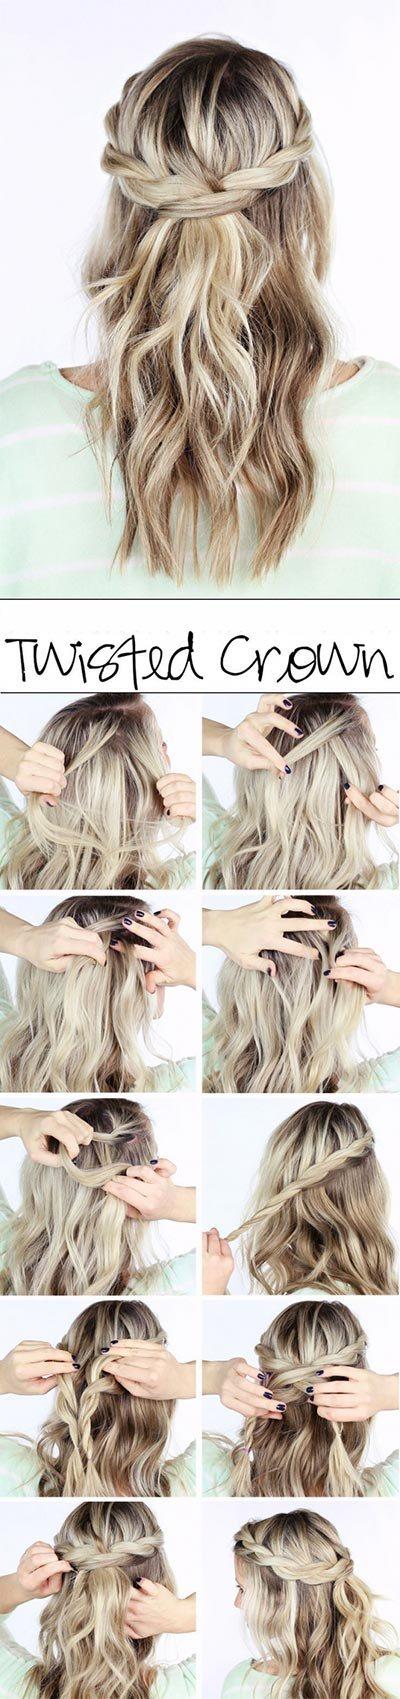 Quick and easy half up half down hairstyles quick-and-easy-half-up-half-down-hairstyles-86_8